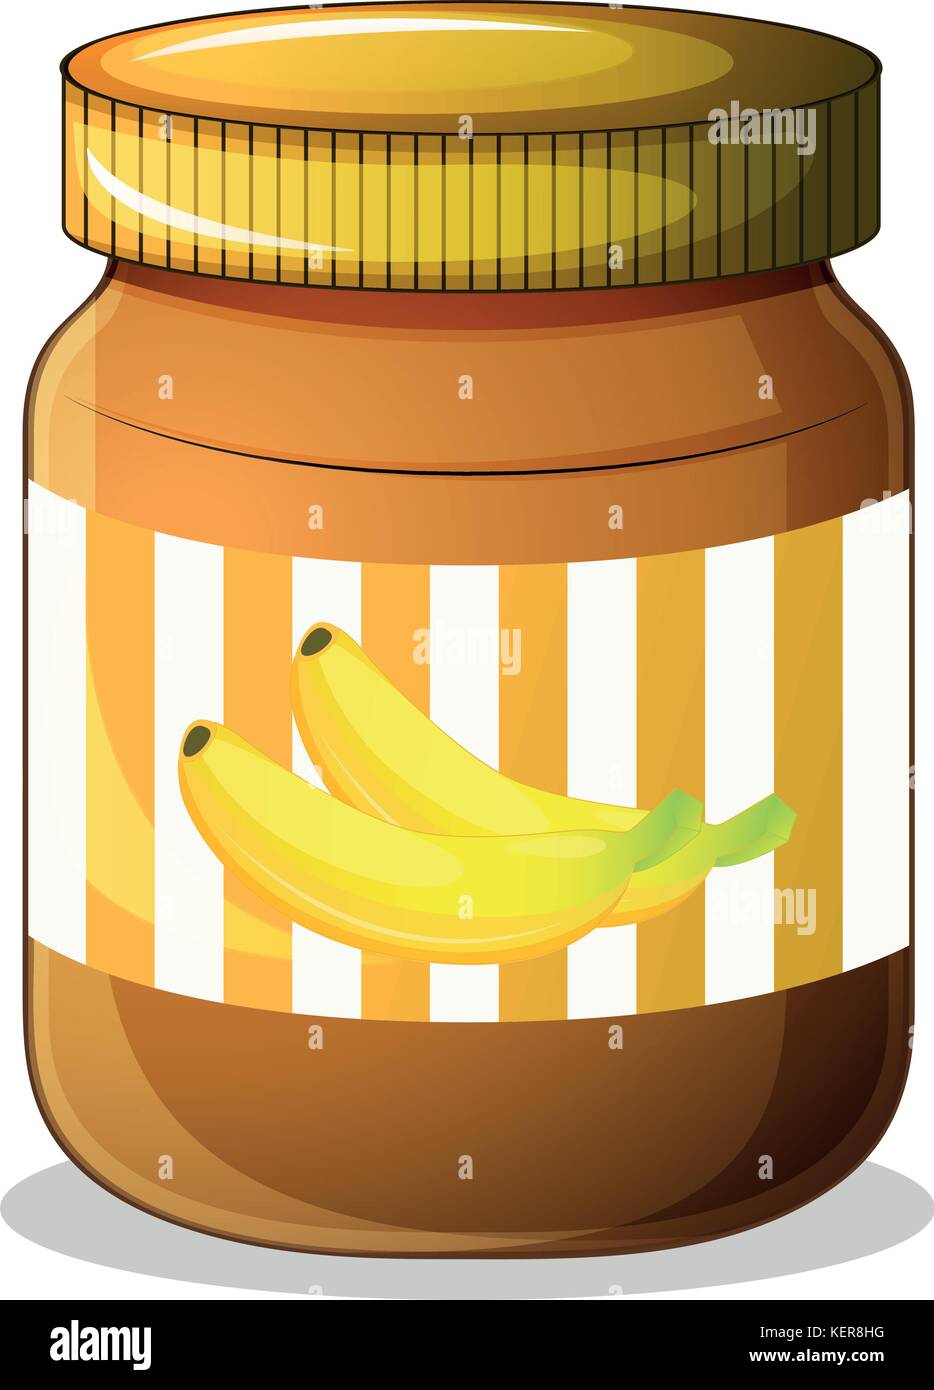 Illustration of a banana jam on a white background Stock Vector